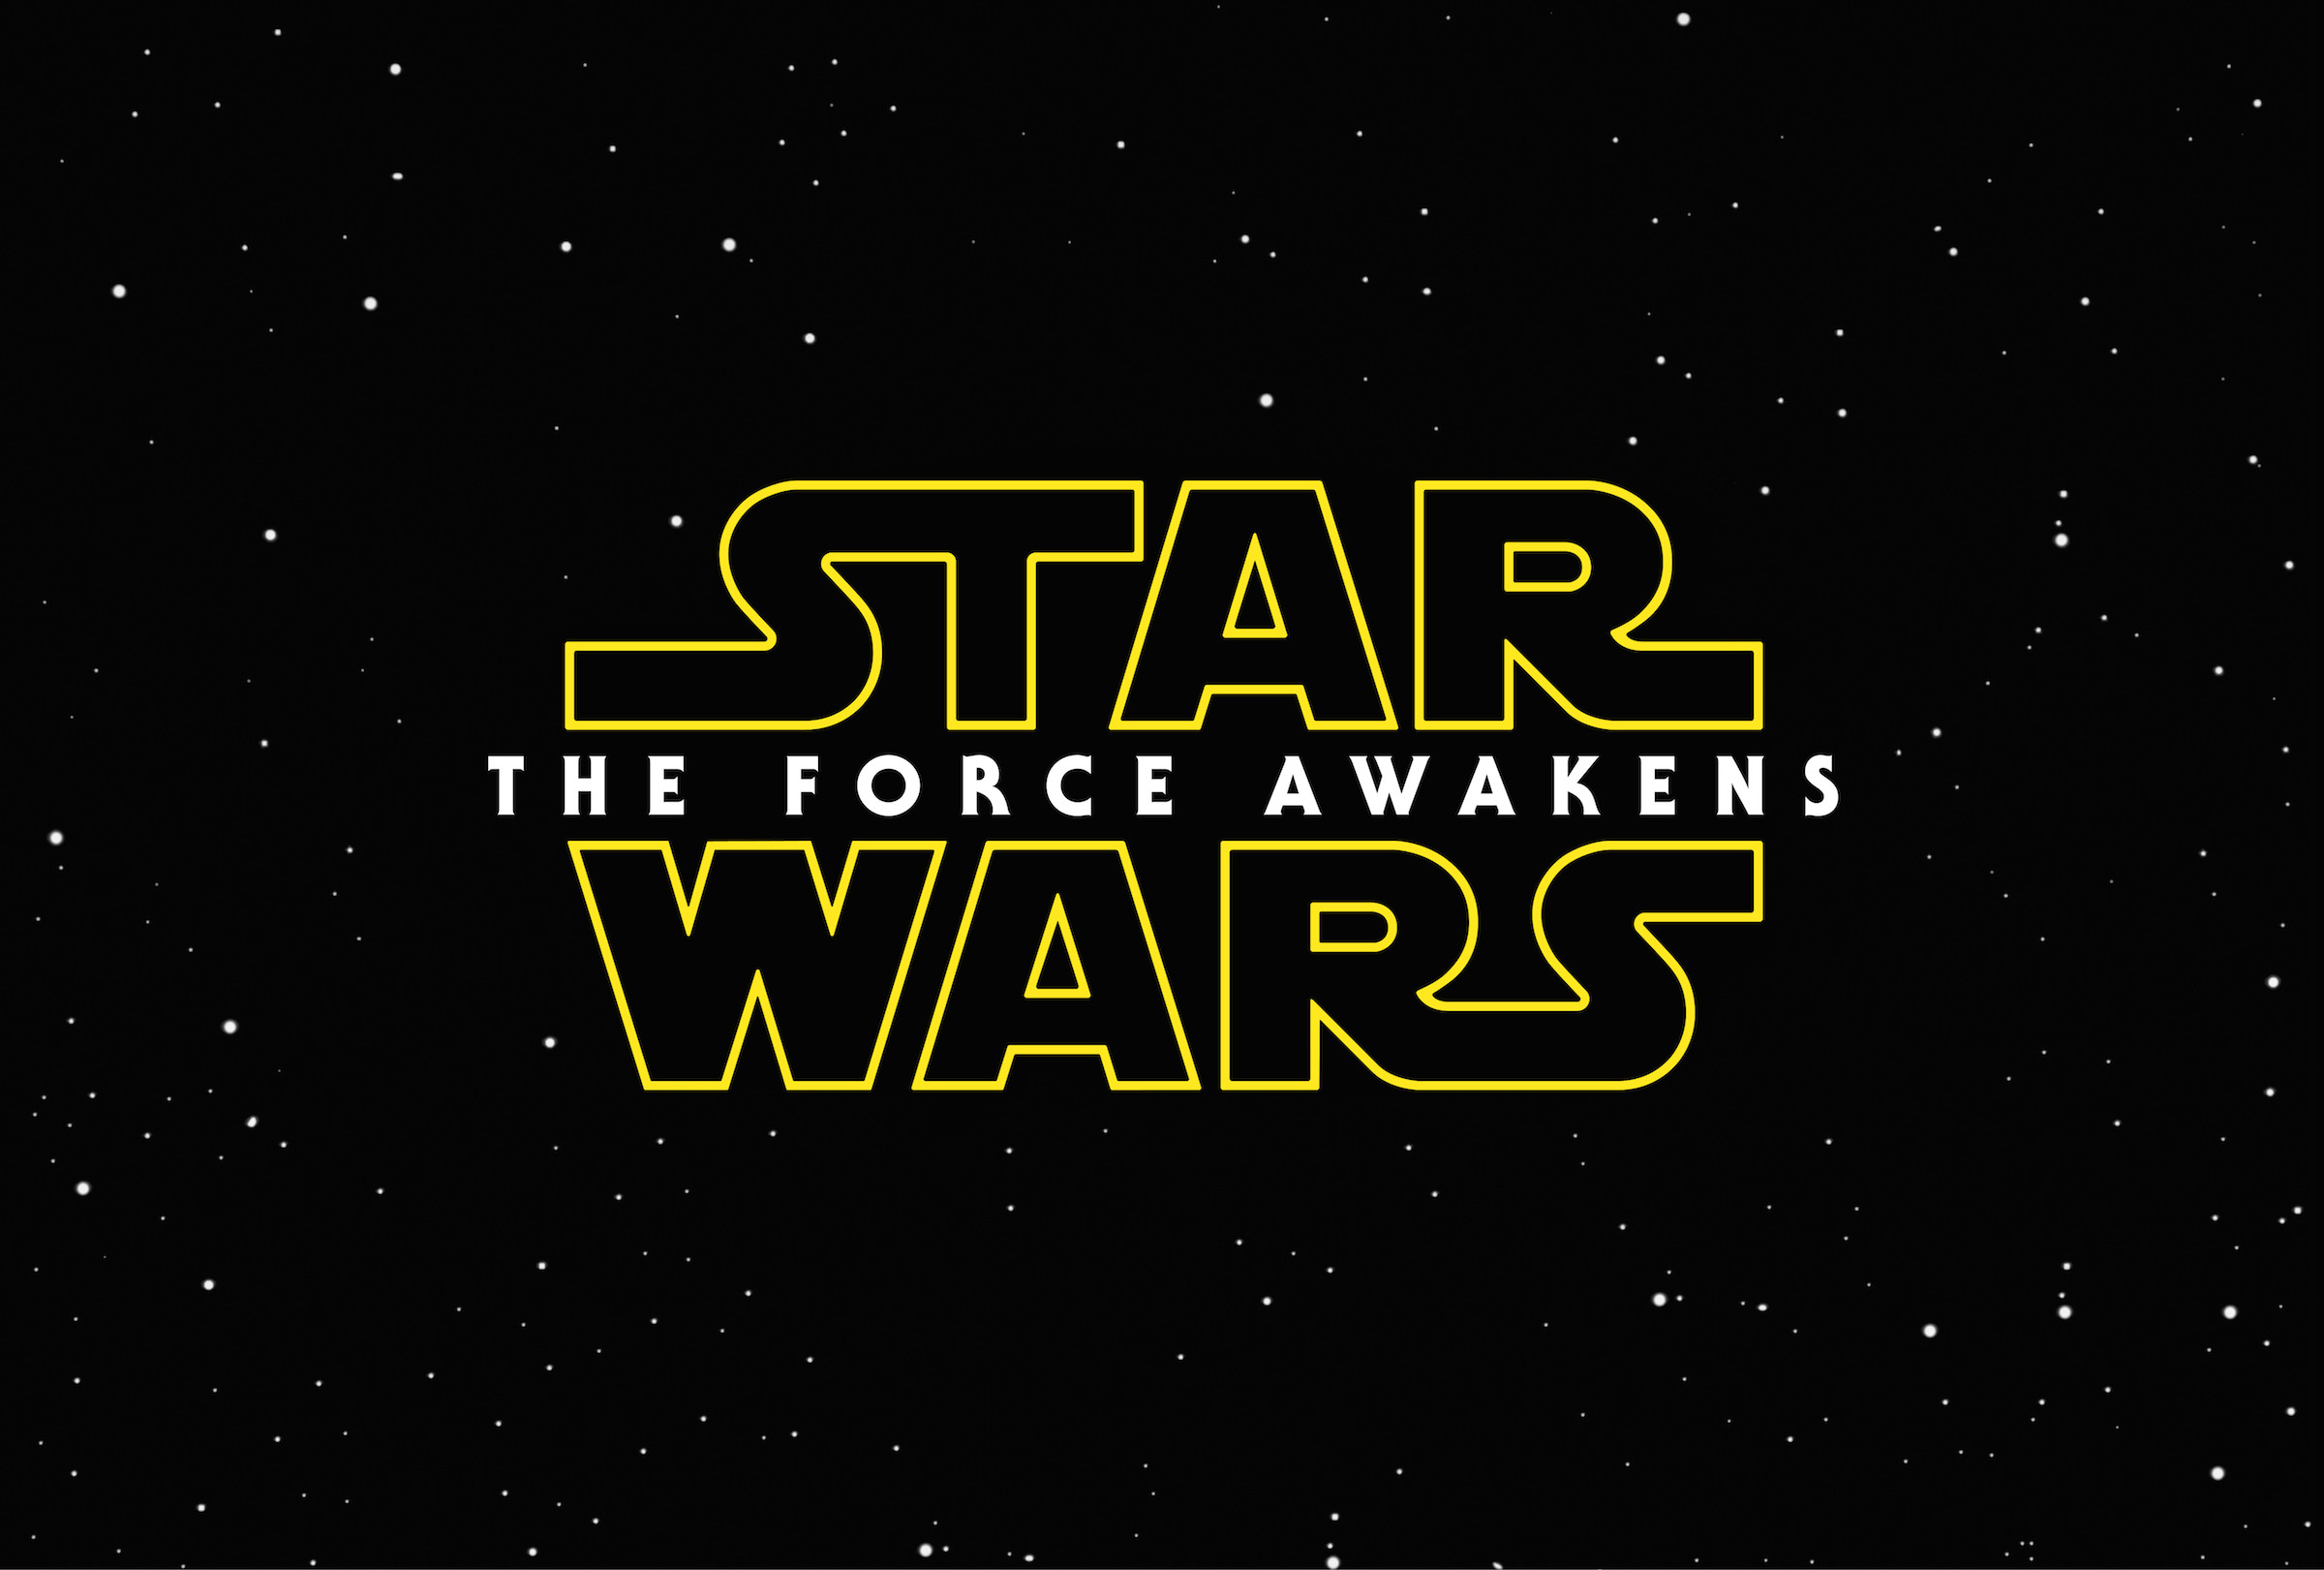 Letter Scroll for Star Wars The Force Awakens!